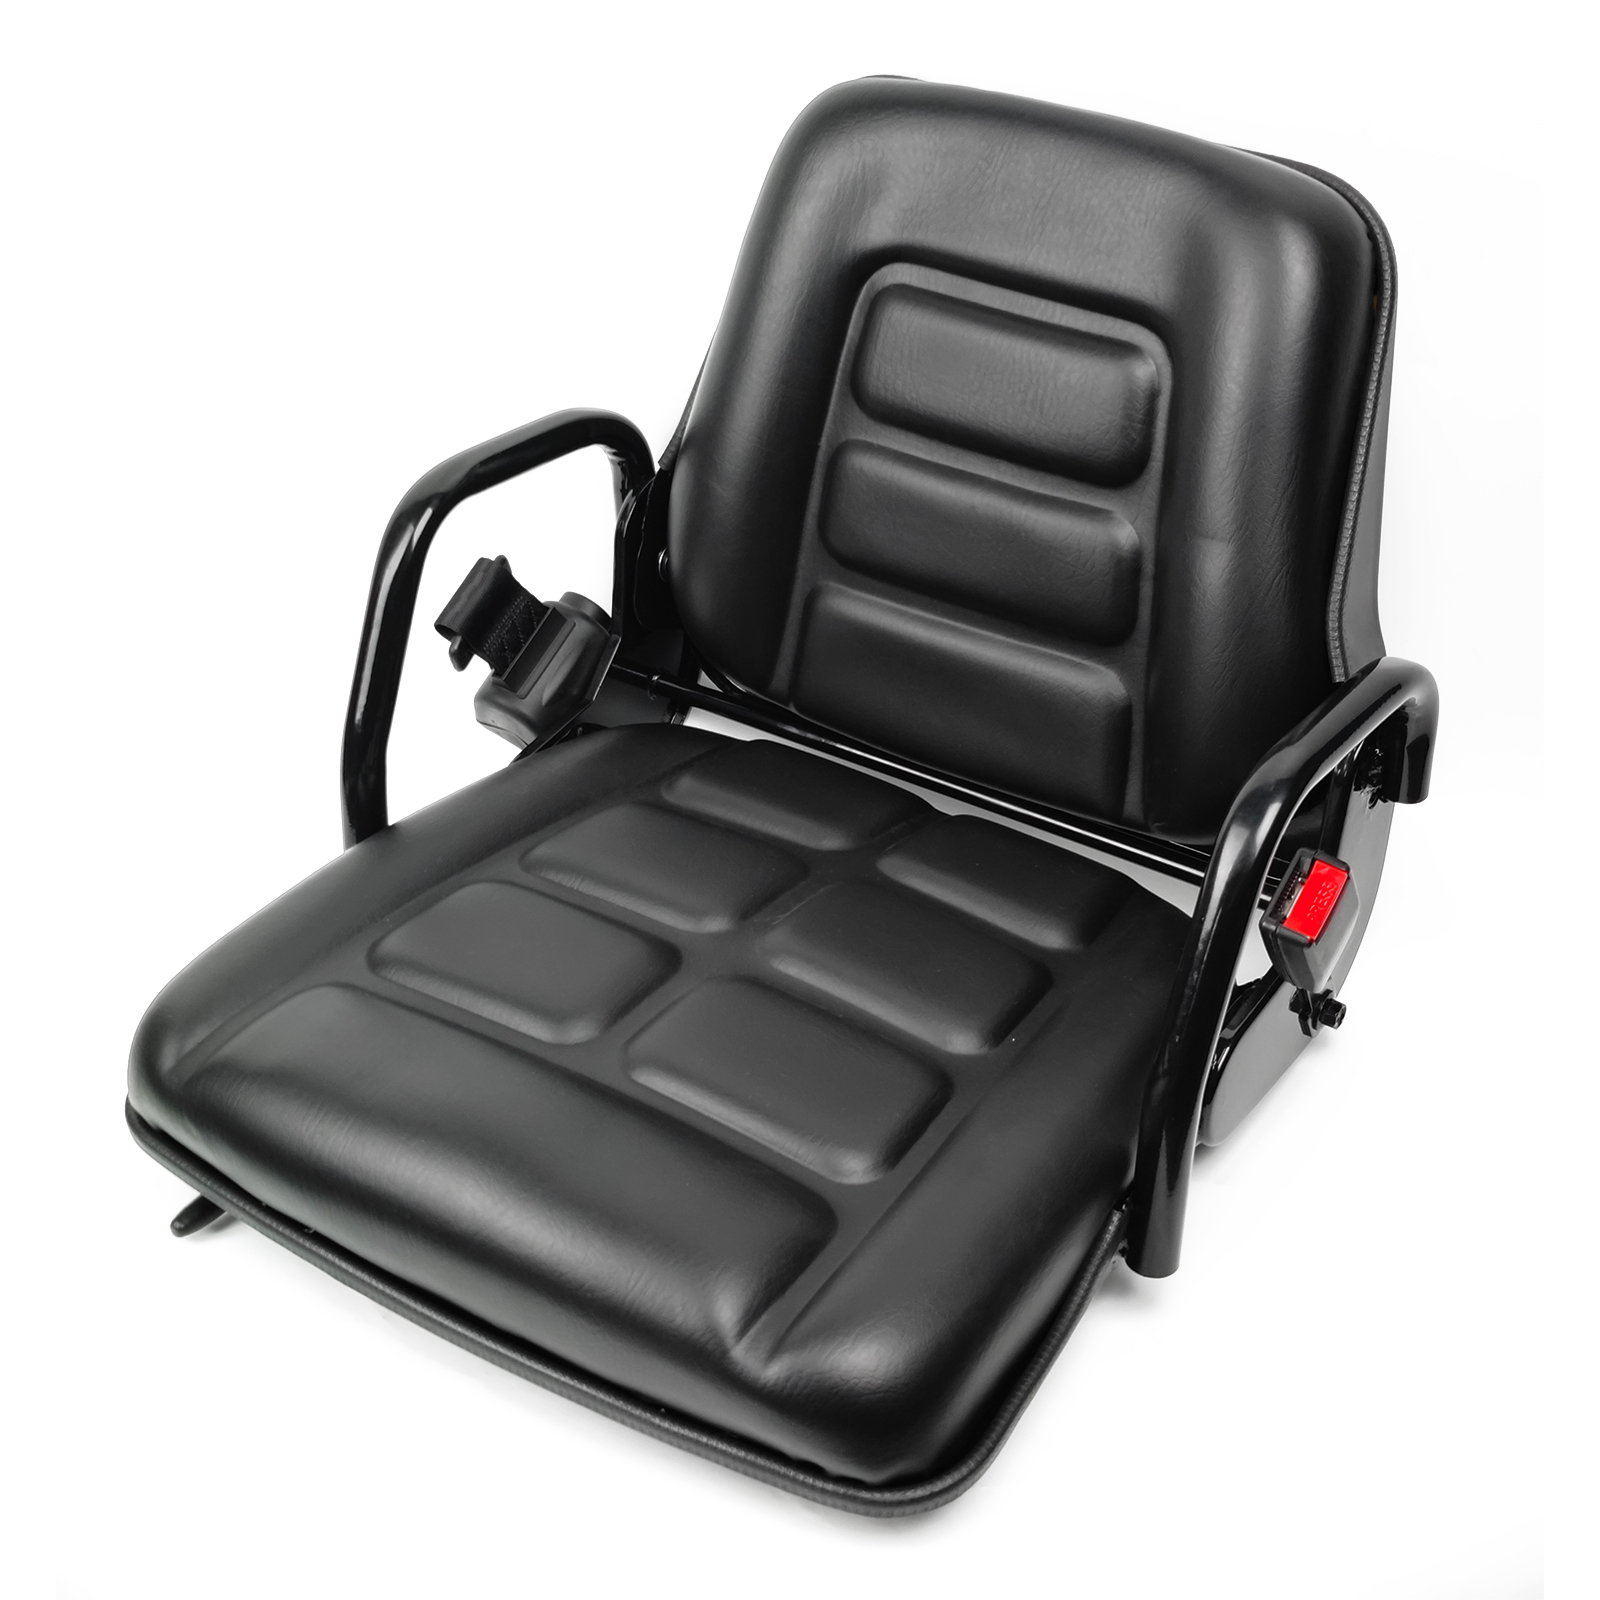 OEM Supply Tractor Seat Chair - Forklift Seat with Integrated Steel Armrest Fold Down Backrest Fits Caterpillar Mitsubishi Doosan forklifts – Qinglin Seat